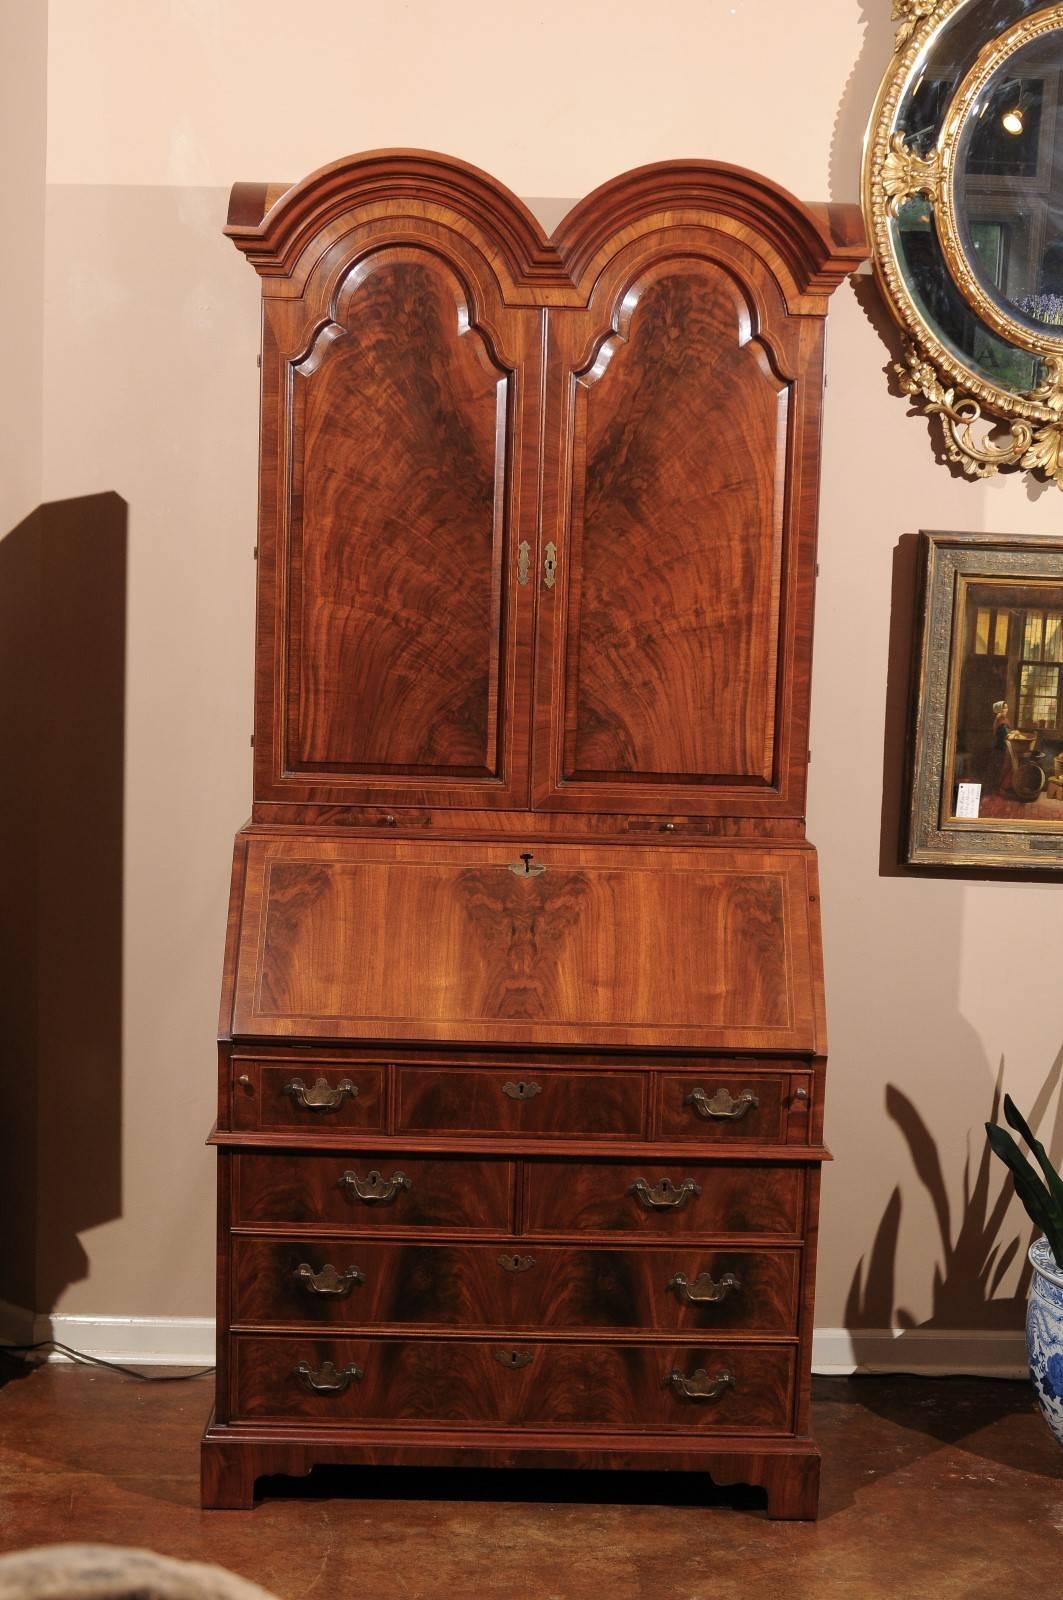 A beautiful burl walnut secretary with double domed bonnet above a pair of solid doors opening to an elaborate interior with many cubbies and drawers with satinwood trim. The lower section with slant front opens to more cubbies and drawers. Three